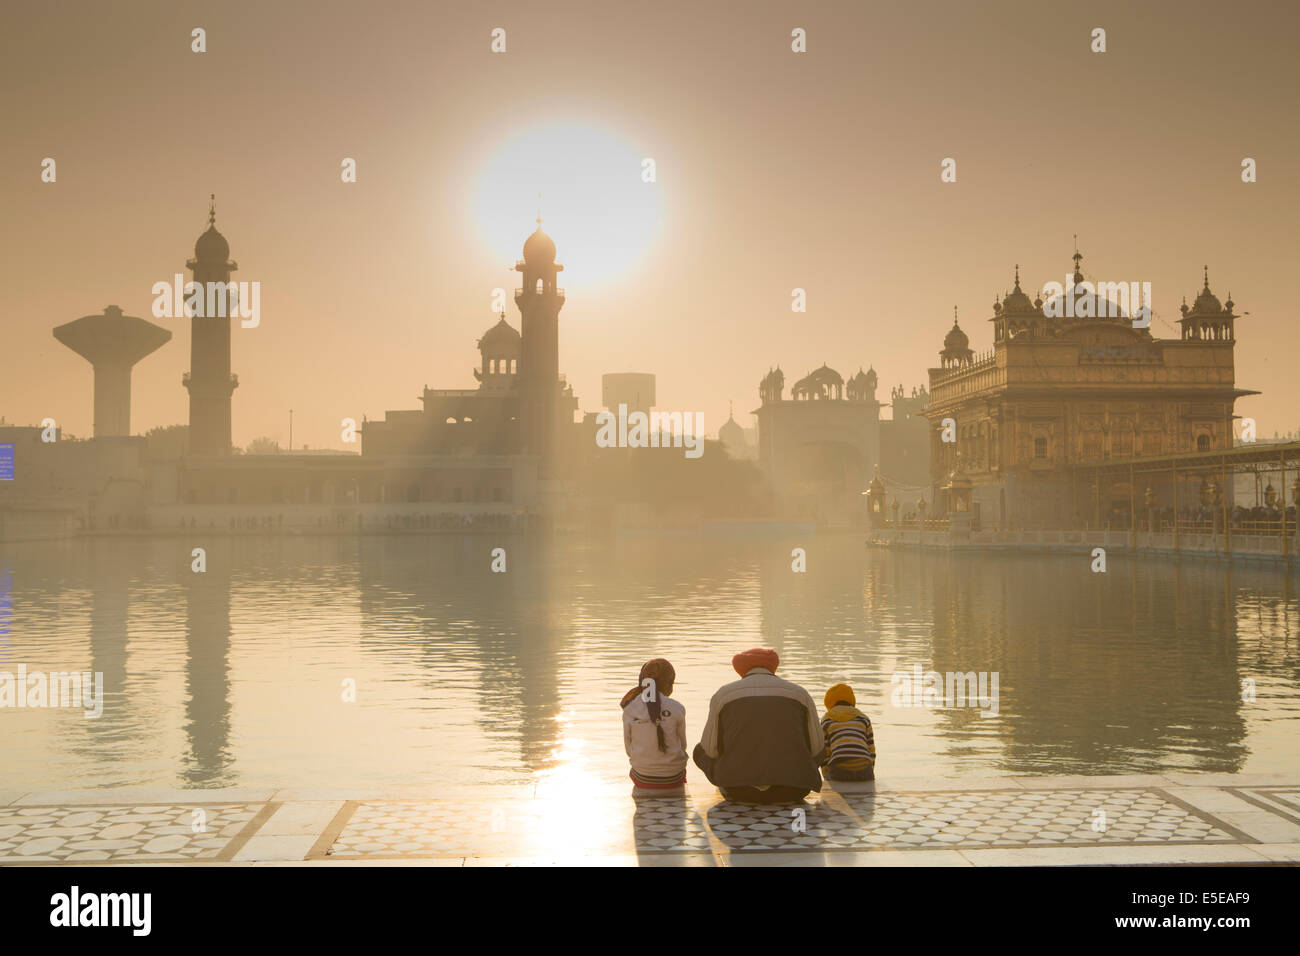 The Golden Temple in Amritsar, Punjab, India Stock Photo